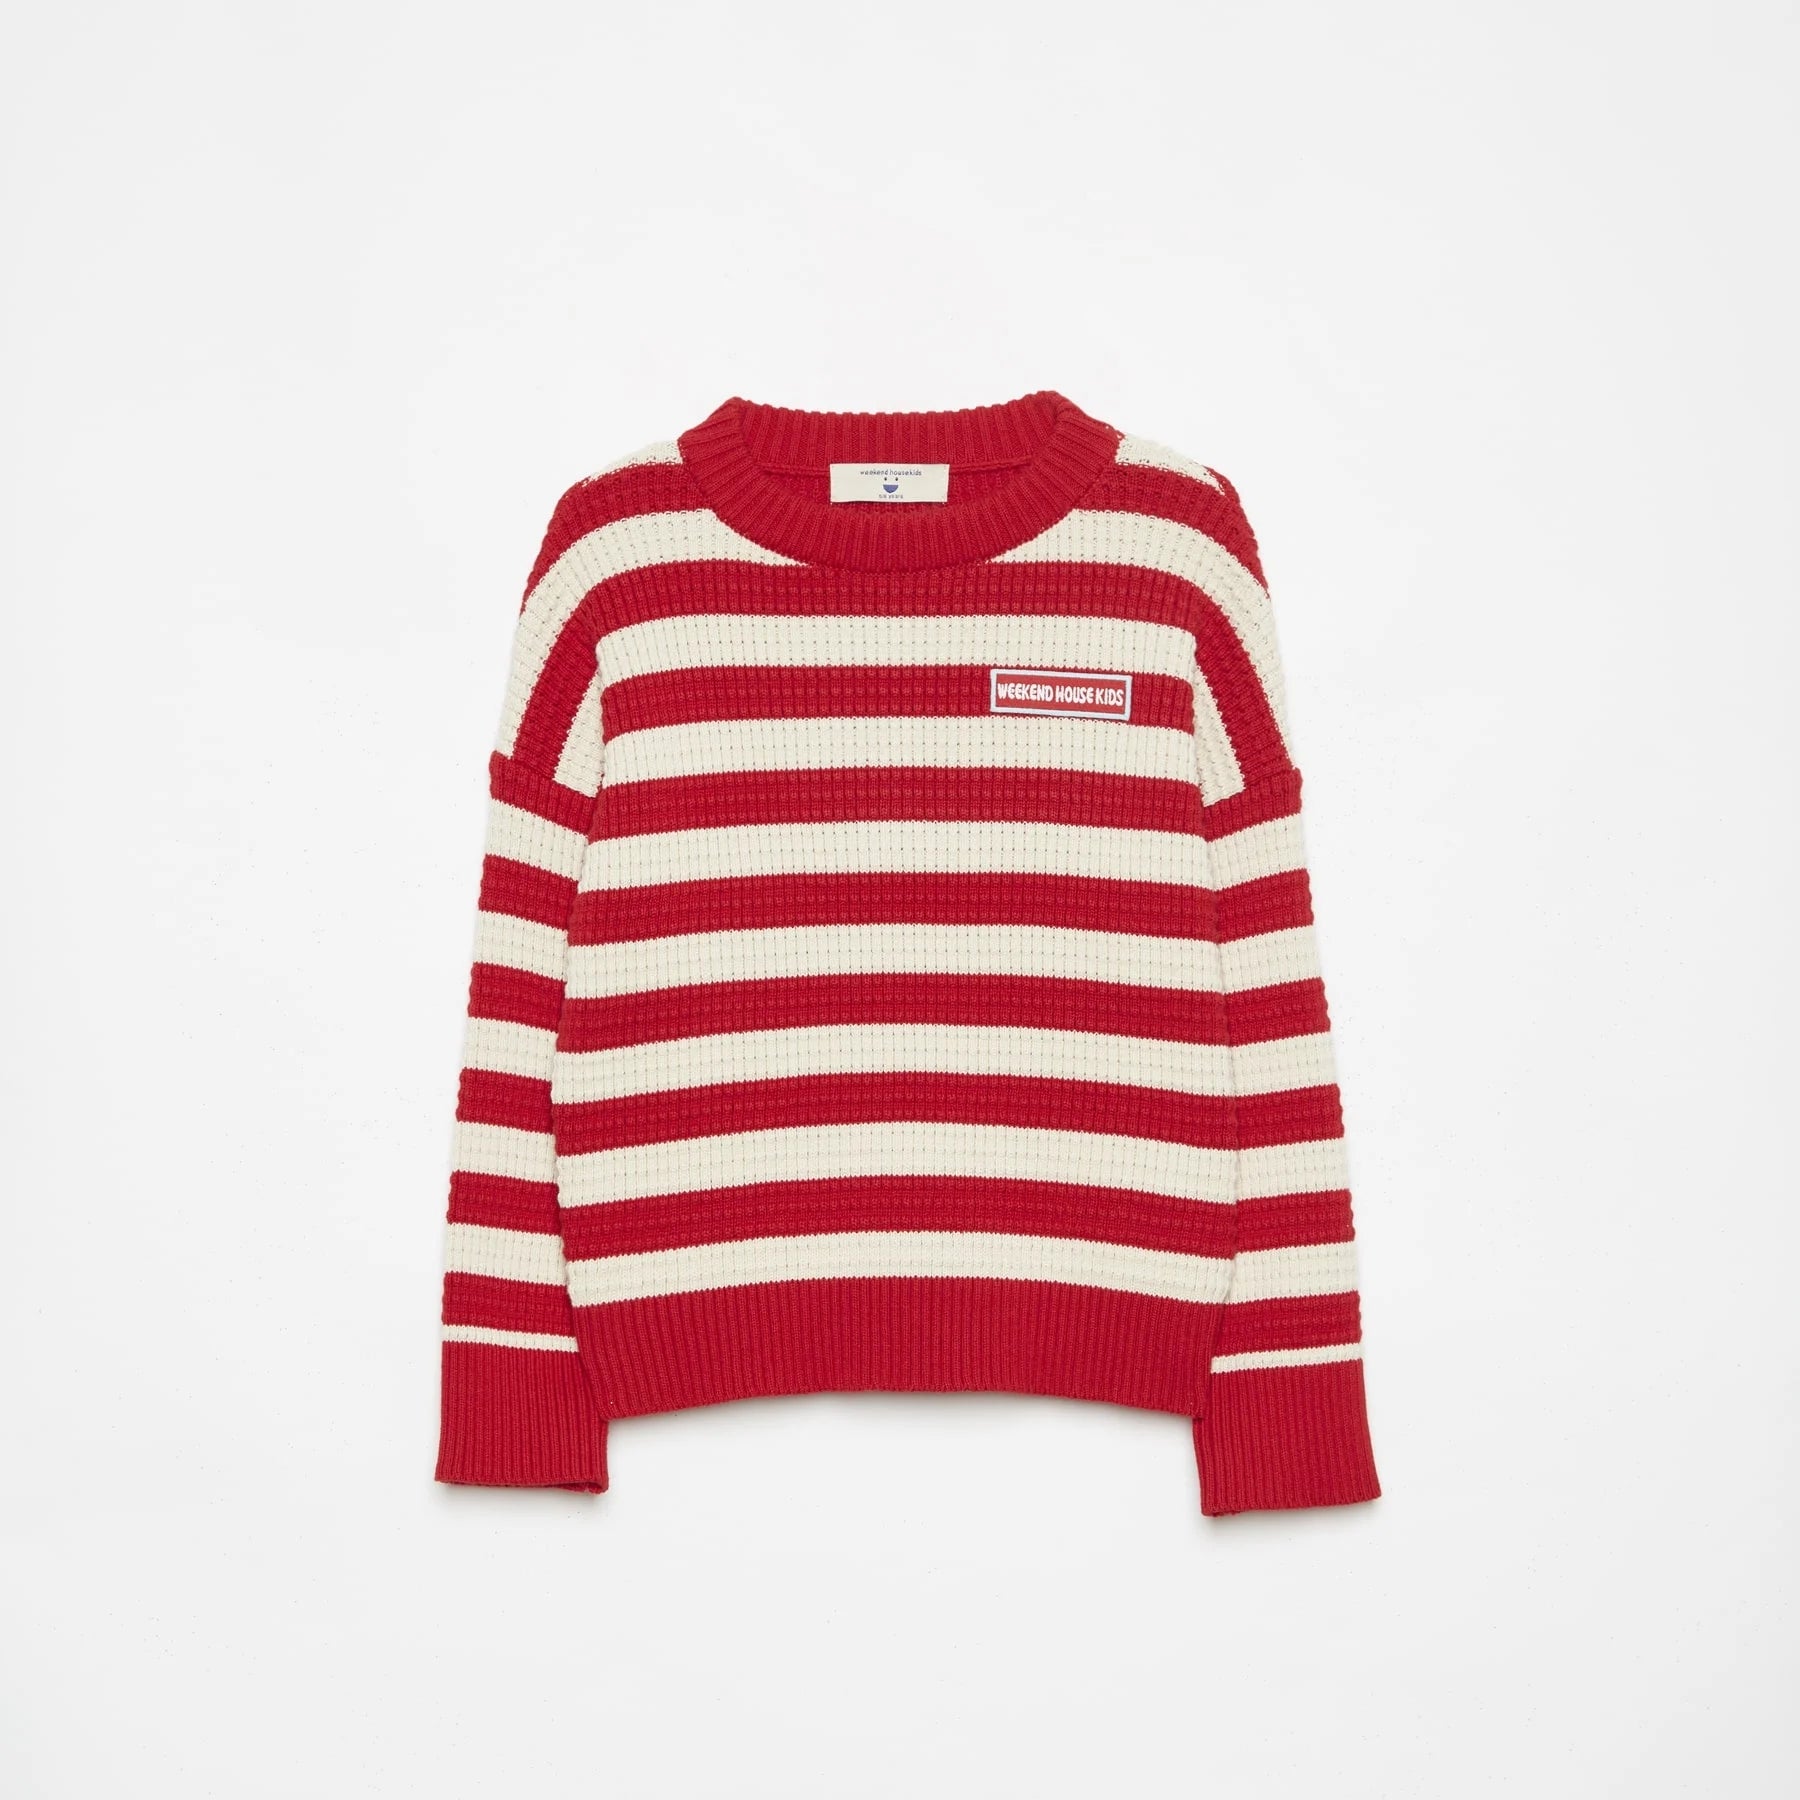 Boys & Girls Red Stripes Cotton Sweater